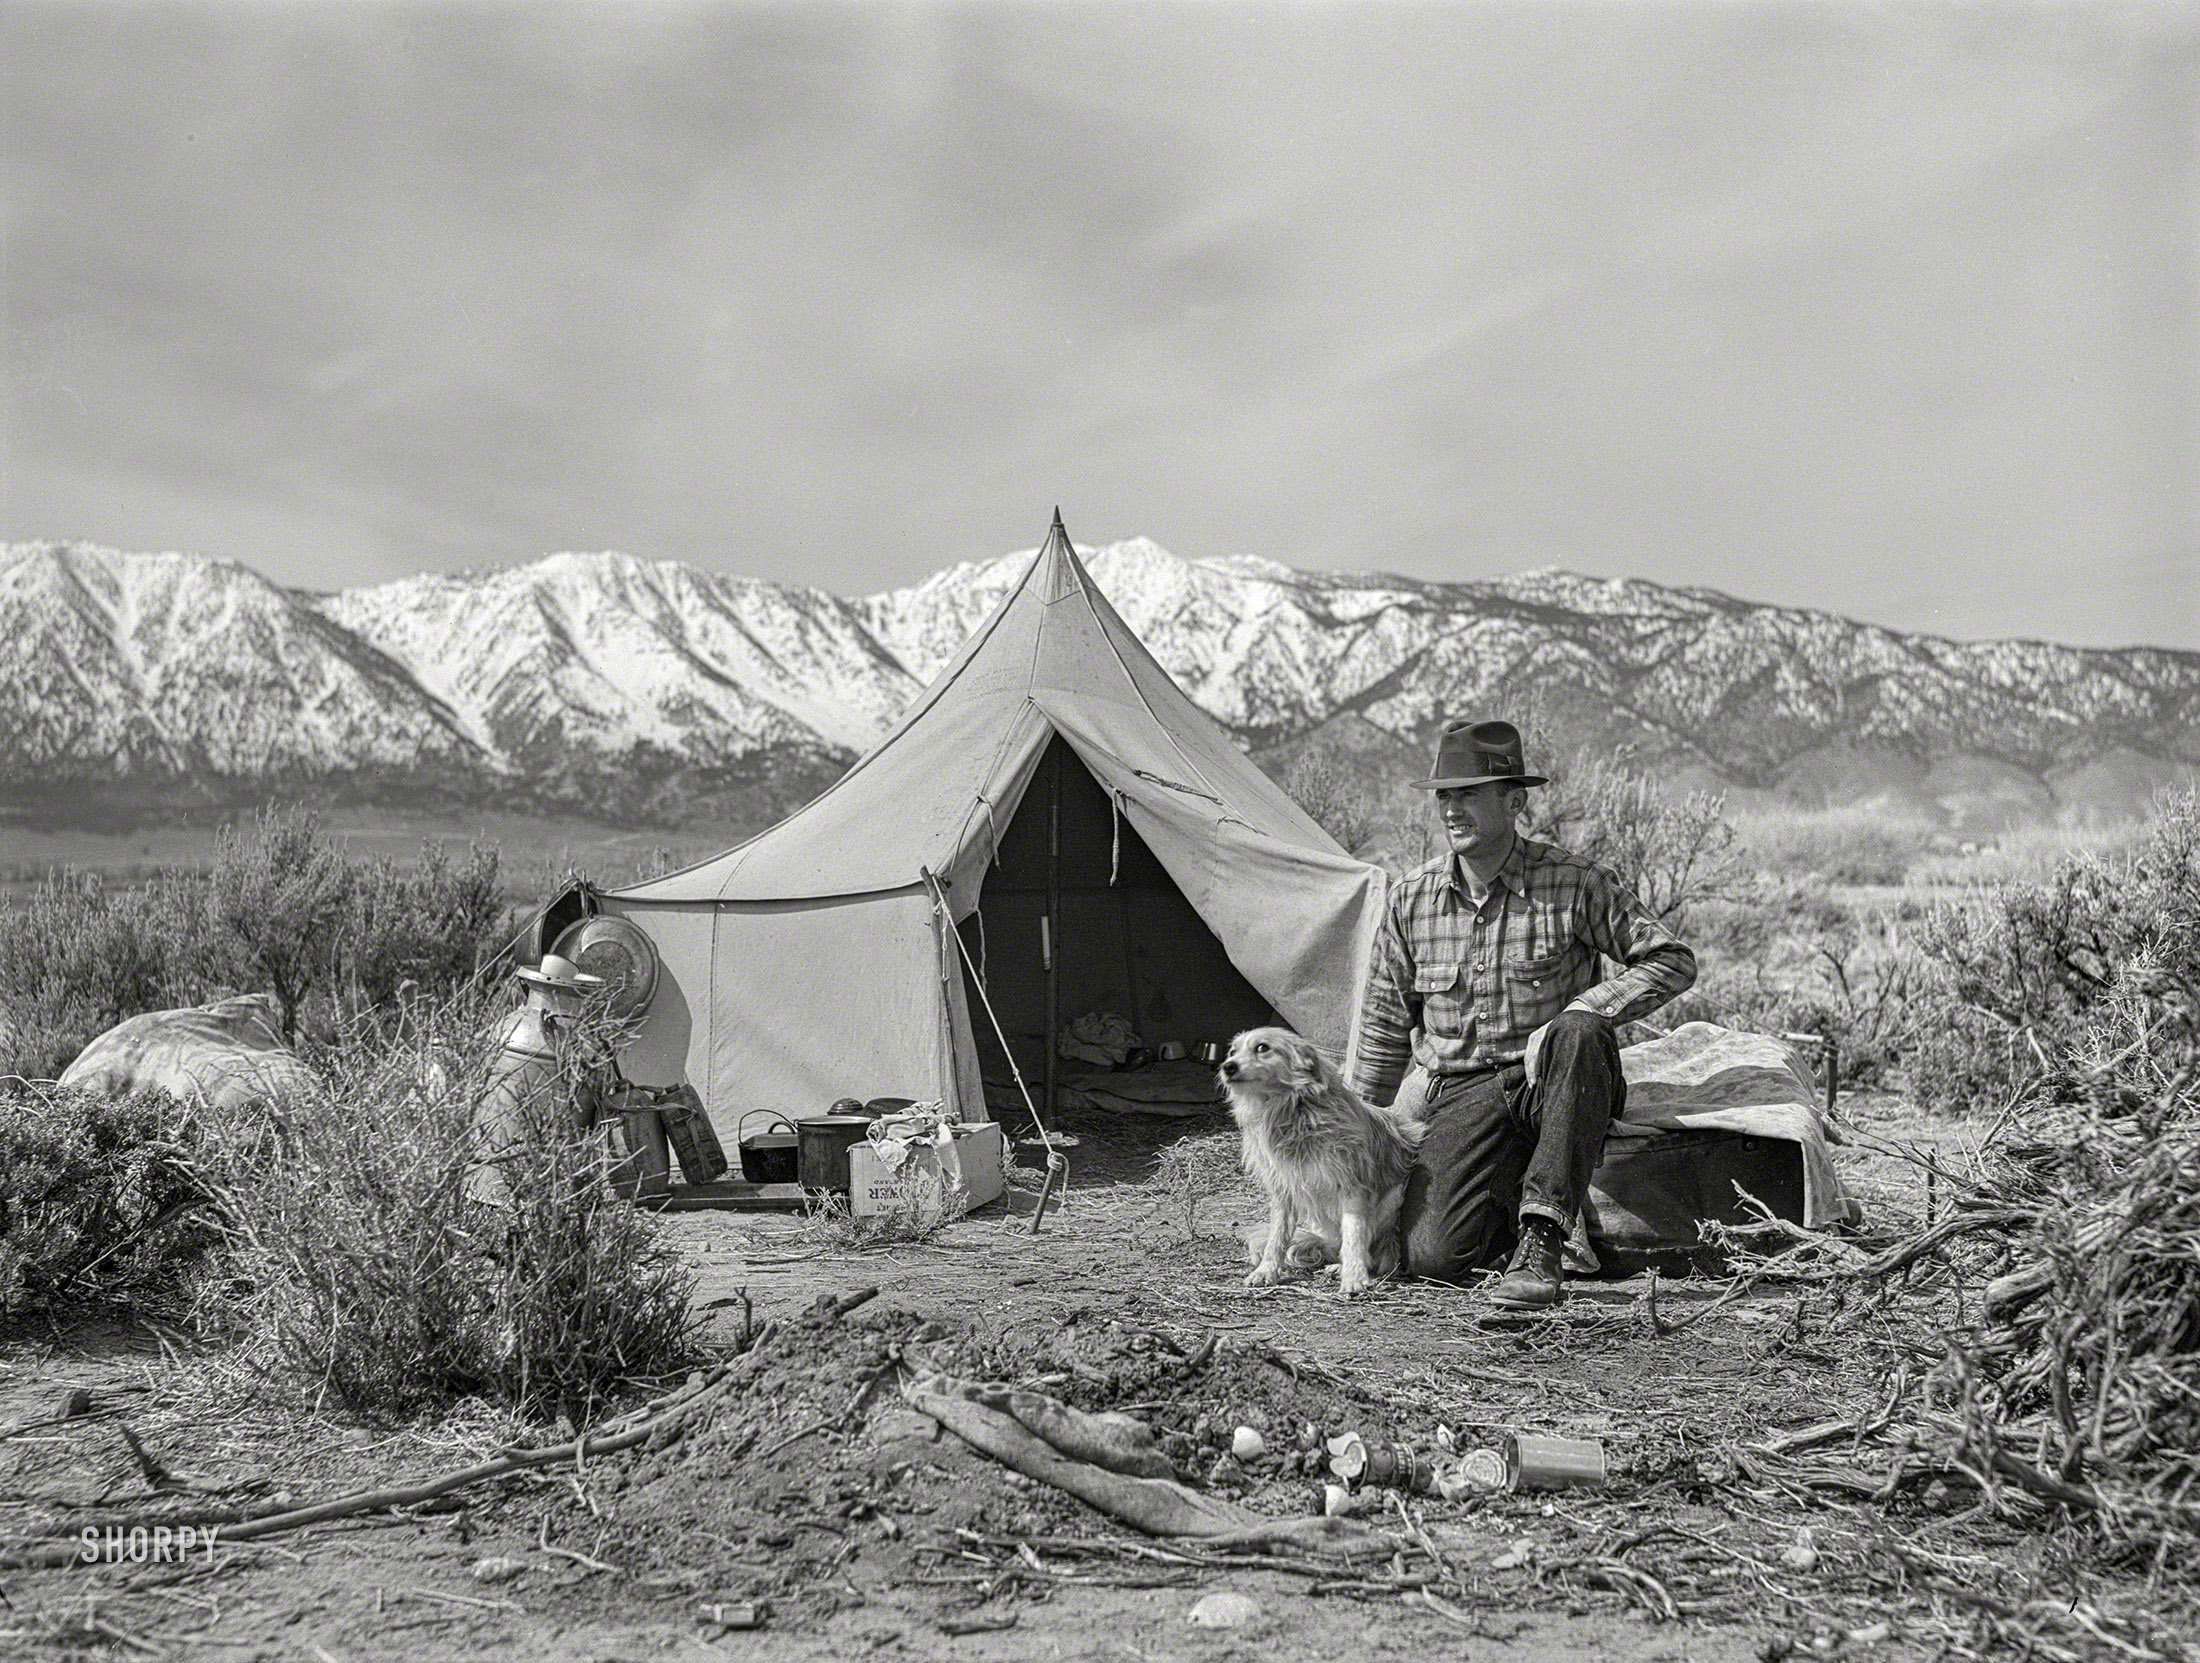 March 1940. "Basque sheepherder camped on the range. Dangberg Ranch, Douglas County, Nevada." Photo by Arthur Rothstein for the Farm Security Administration. View full size.